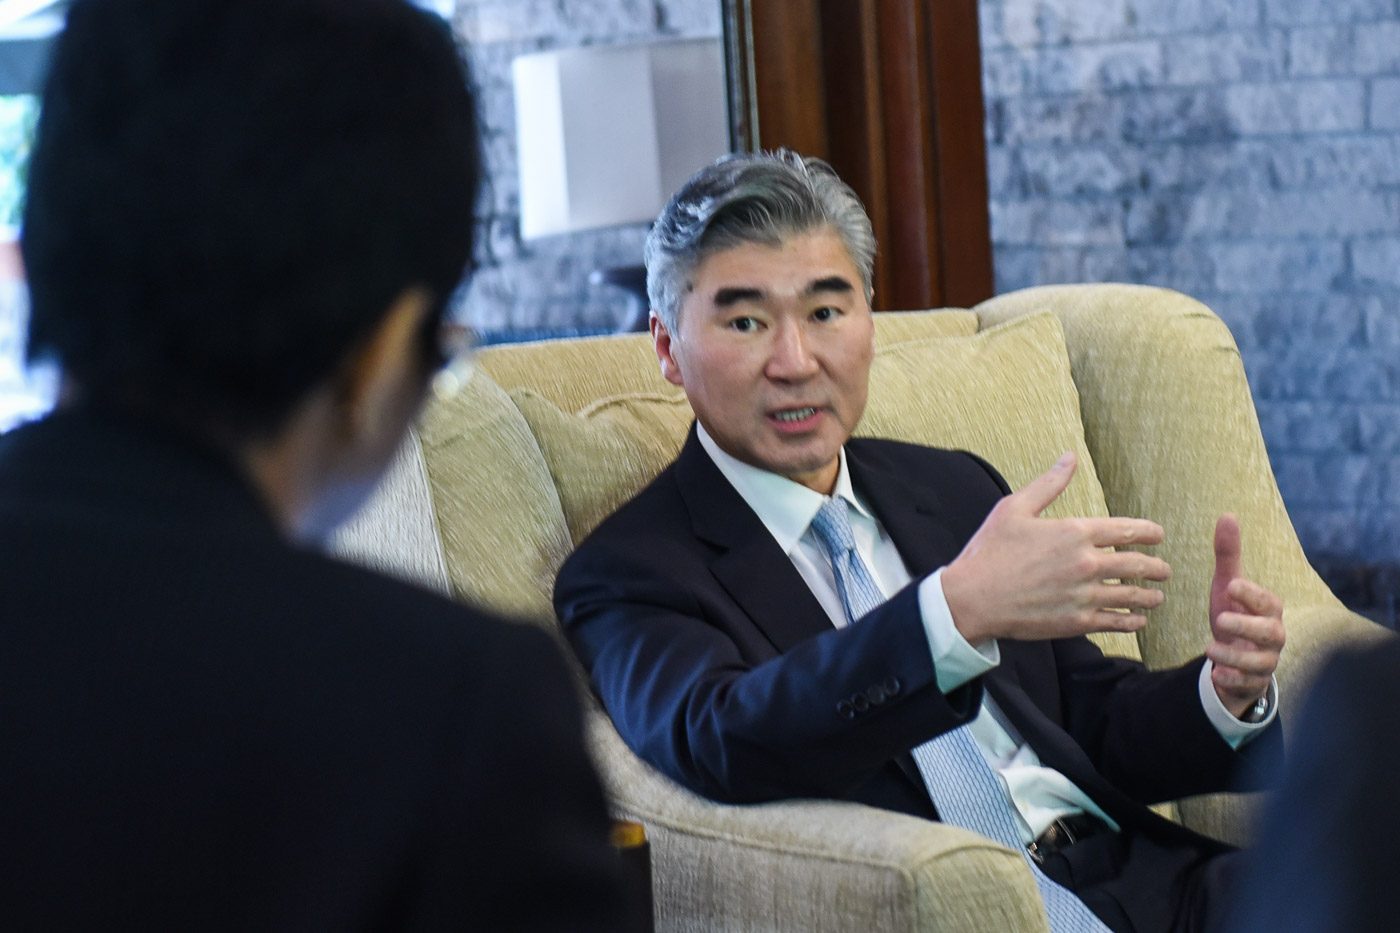 PHILIPPINE-U.S. RELATIONS. US Ambassador Sung Kim addresses questions at a media roundtable on January 24, 2017. Photo by LeAnne Jazul/Rappler  